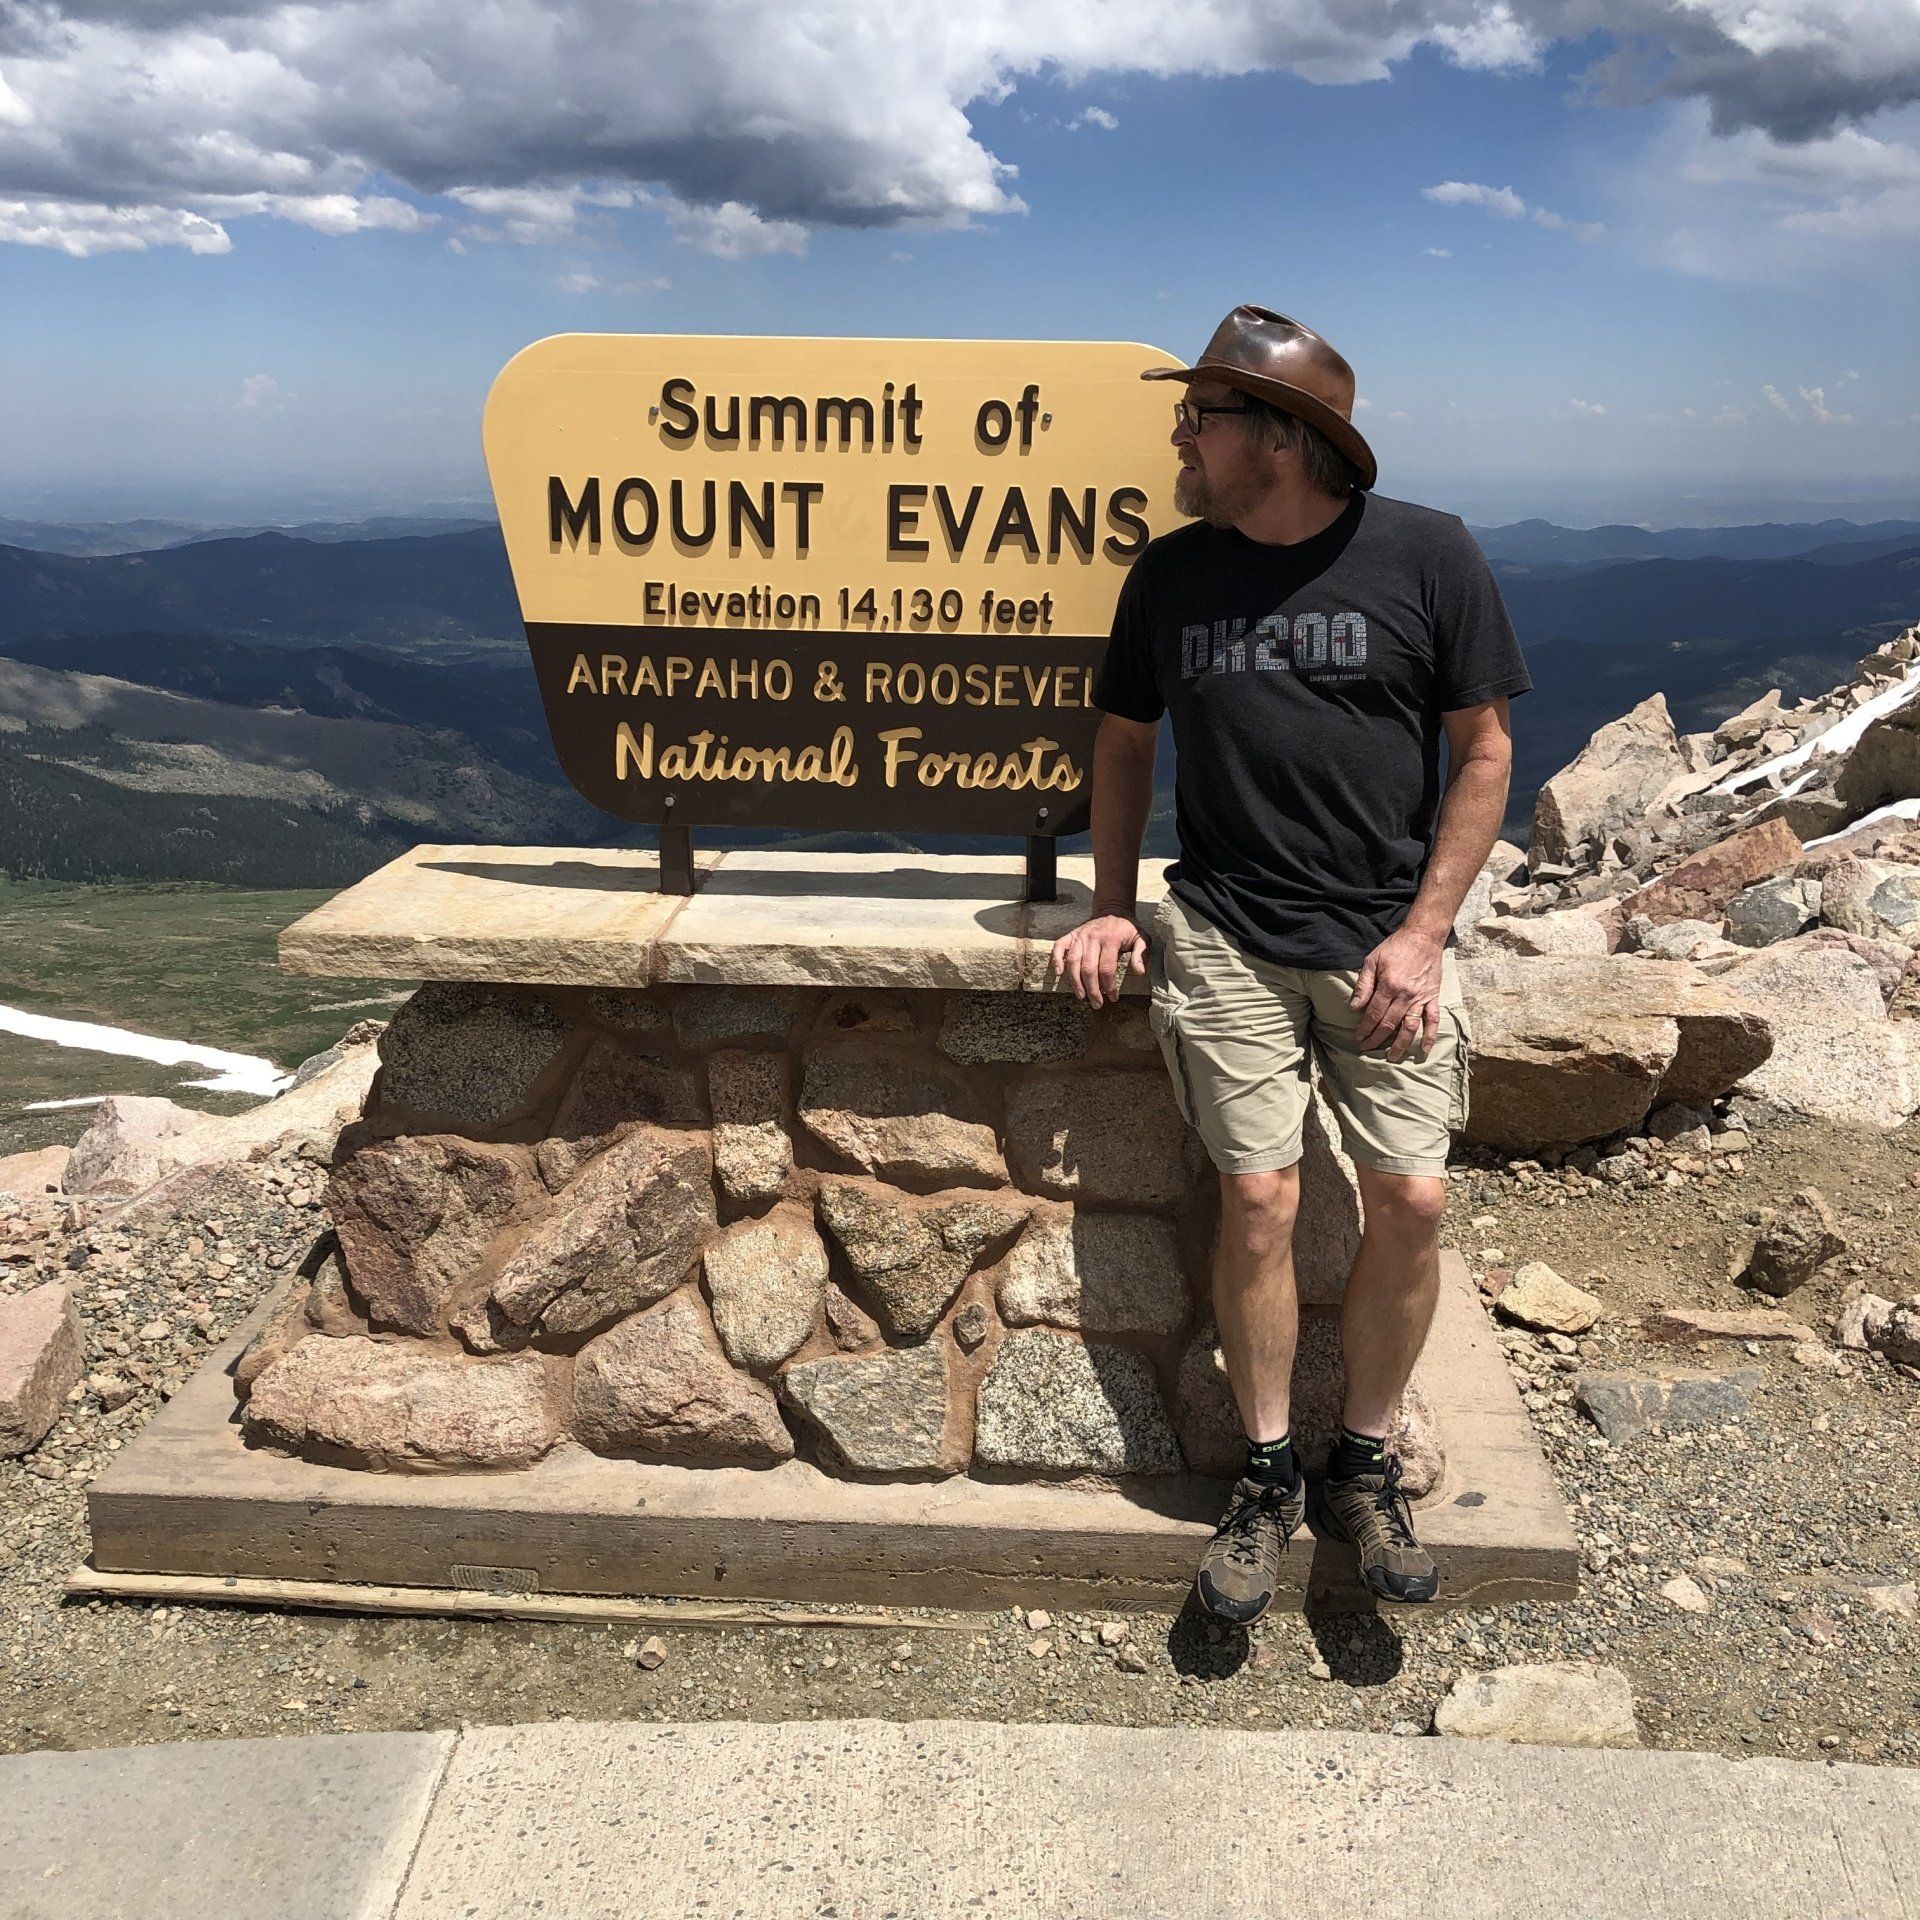 Dick Rees at the summit of Mount Evans.